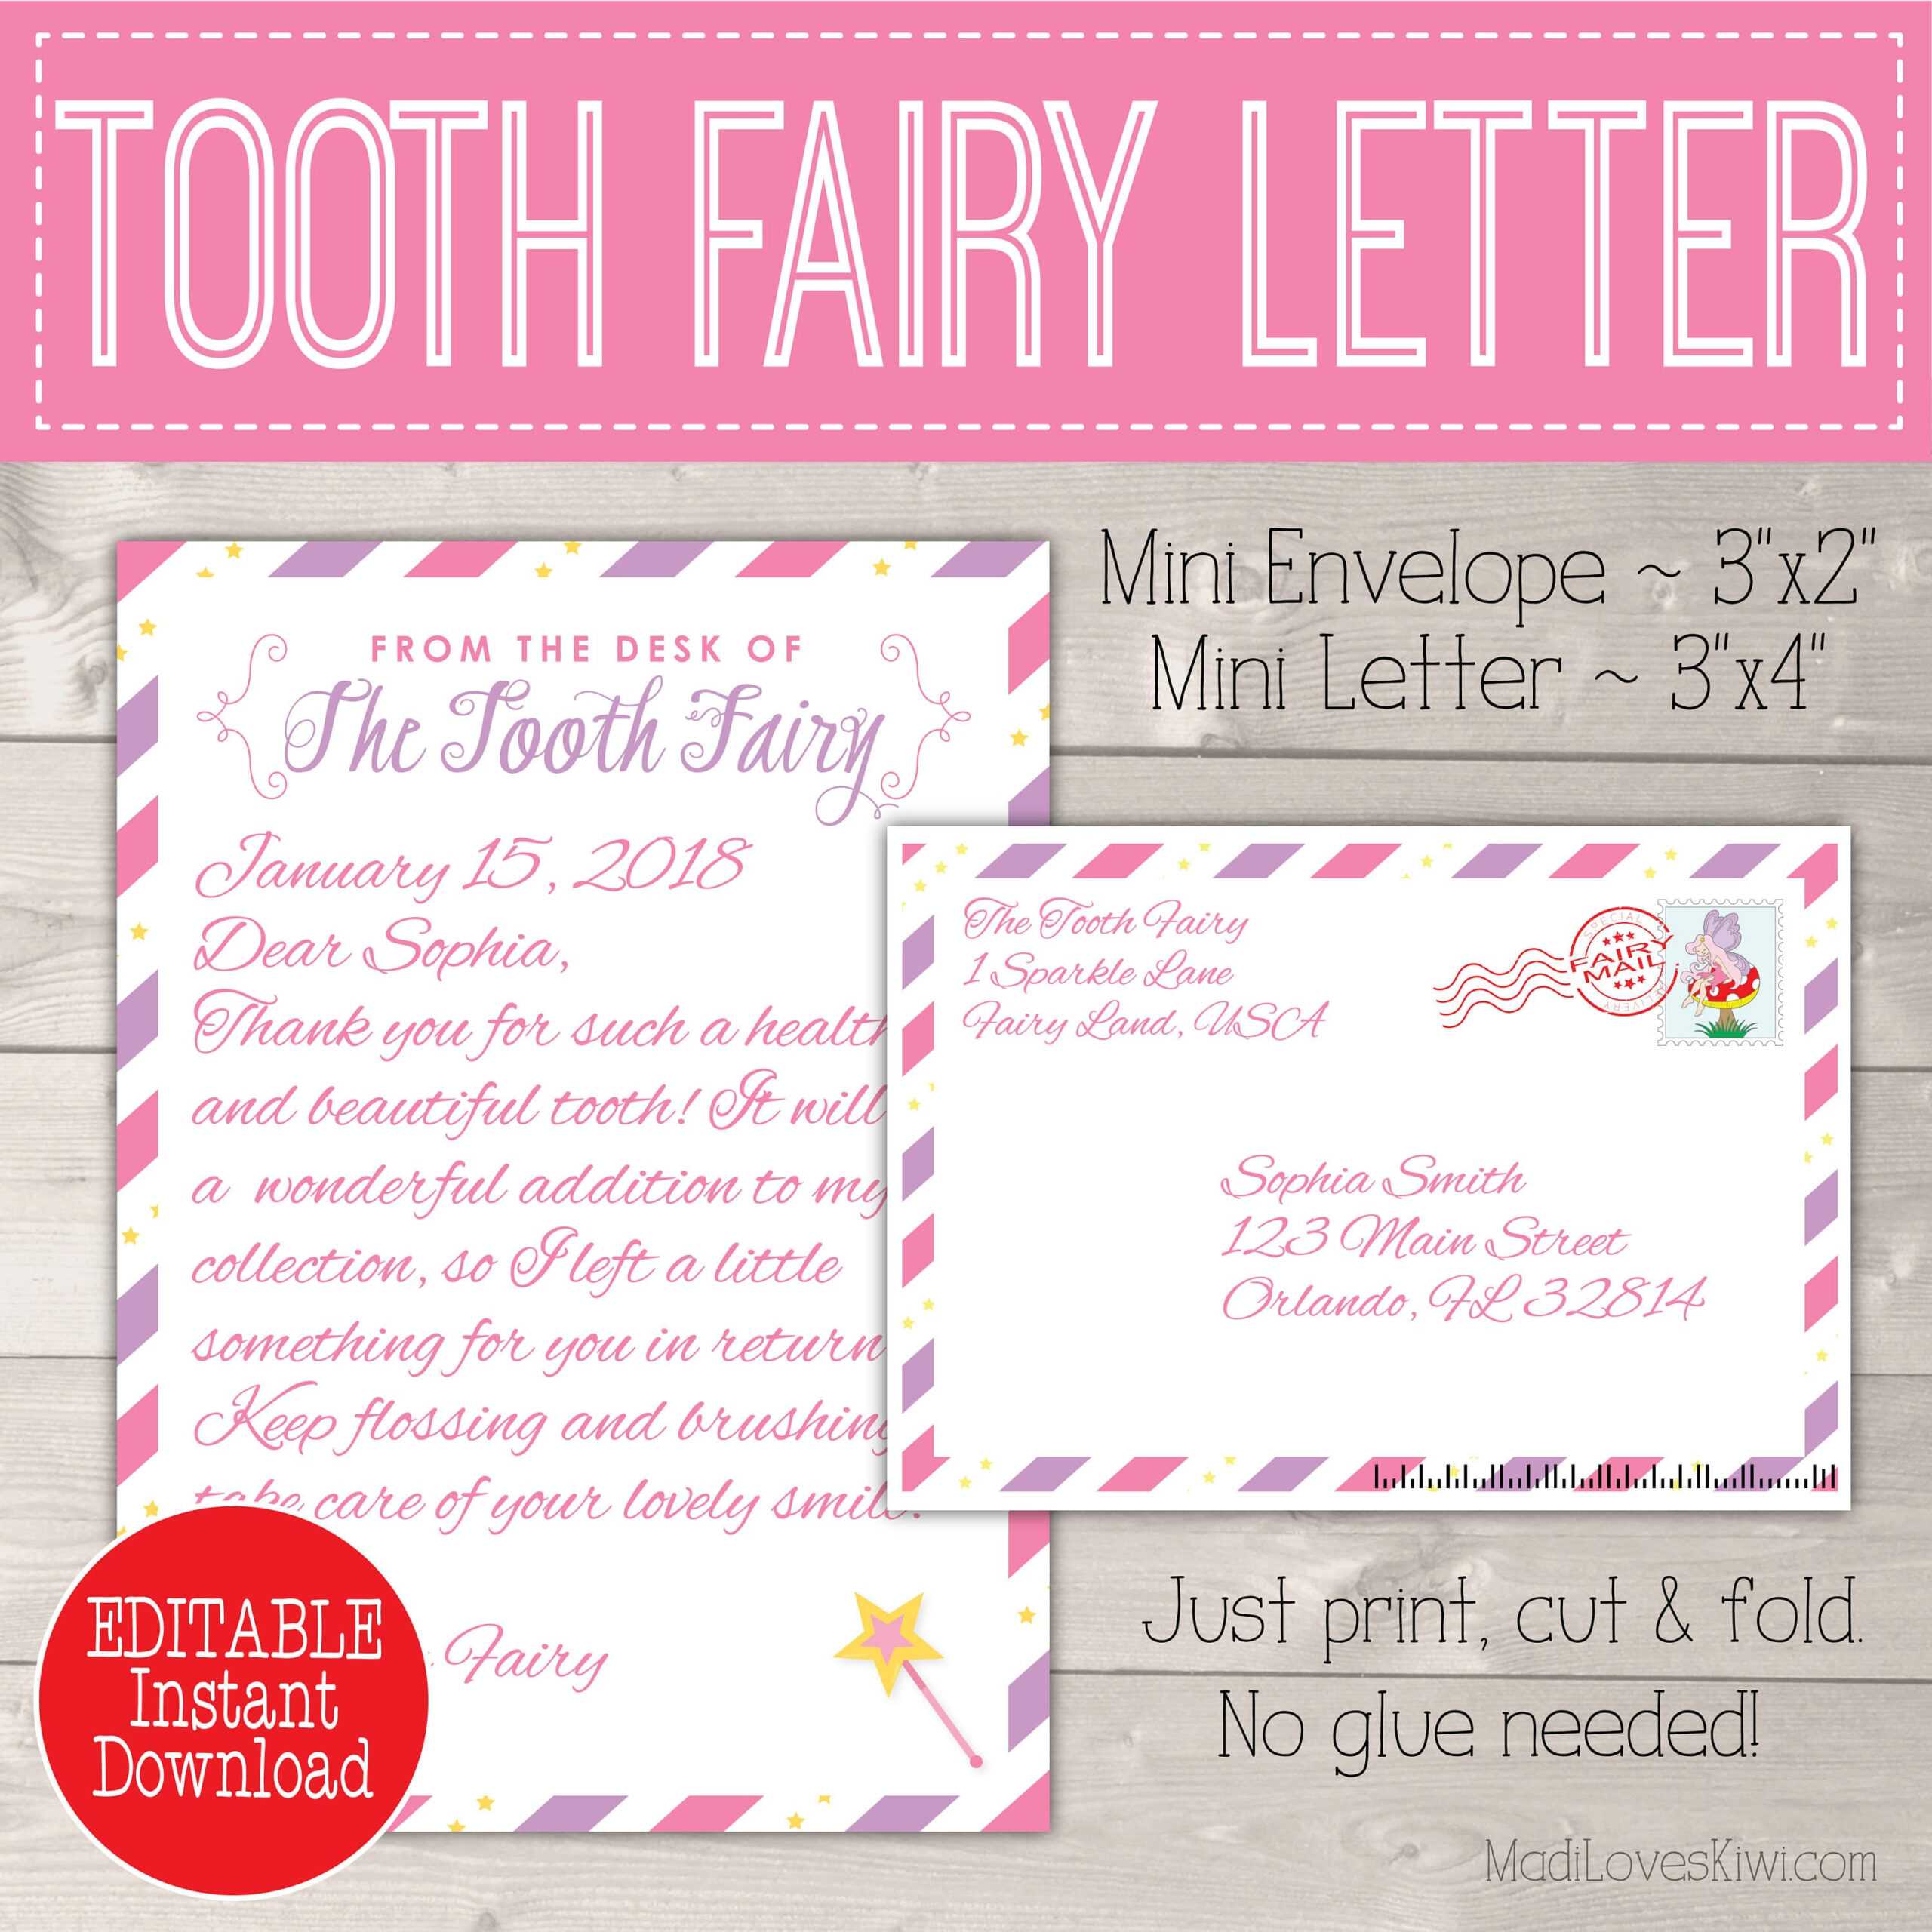 Editable Tooth Fairy Letter With Envelope | Printable Pink With Regard To Tooth Fairy Certificate Template Free